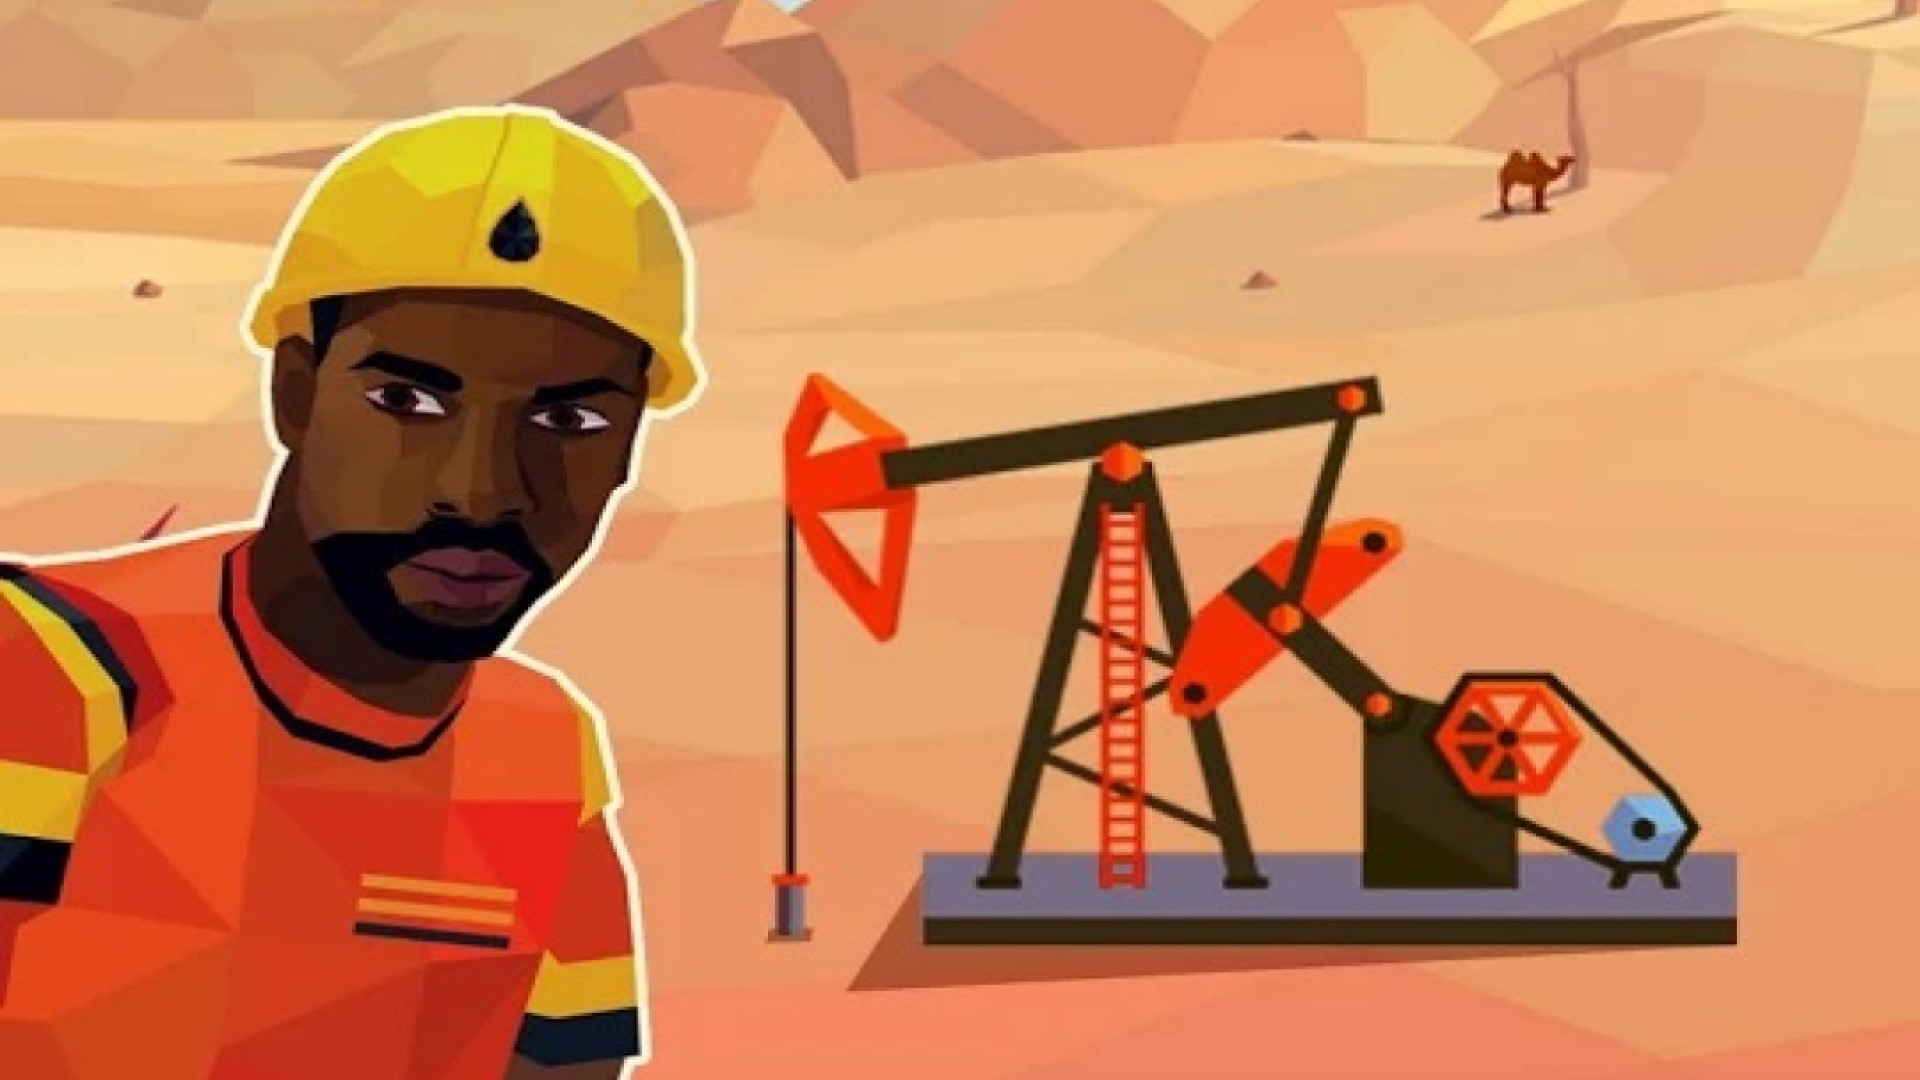 Best idle games: Idle Oil Tycoon. Image shows an engineer with an oil rig behind them.